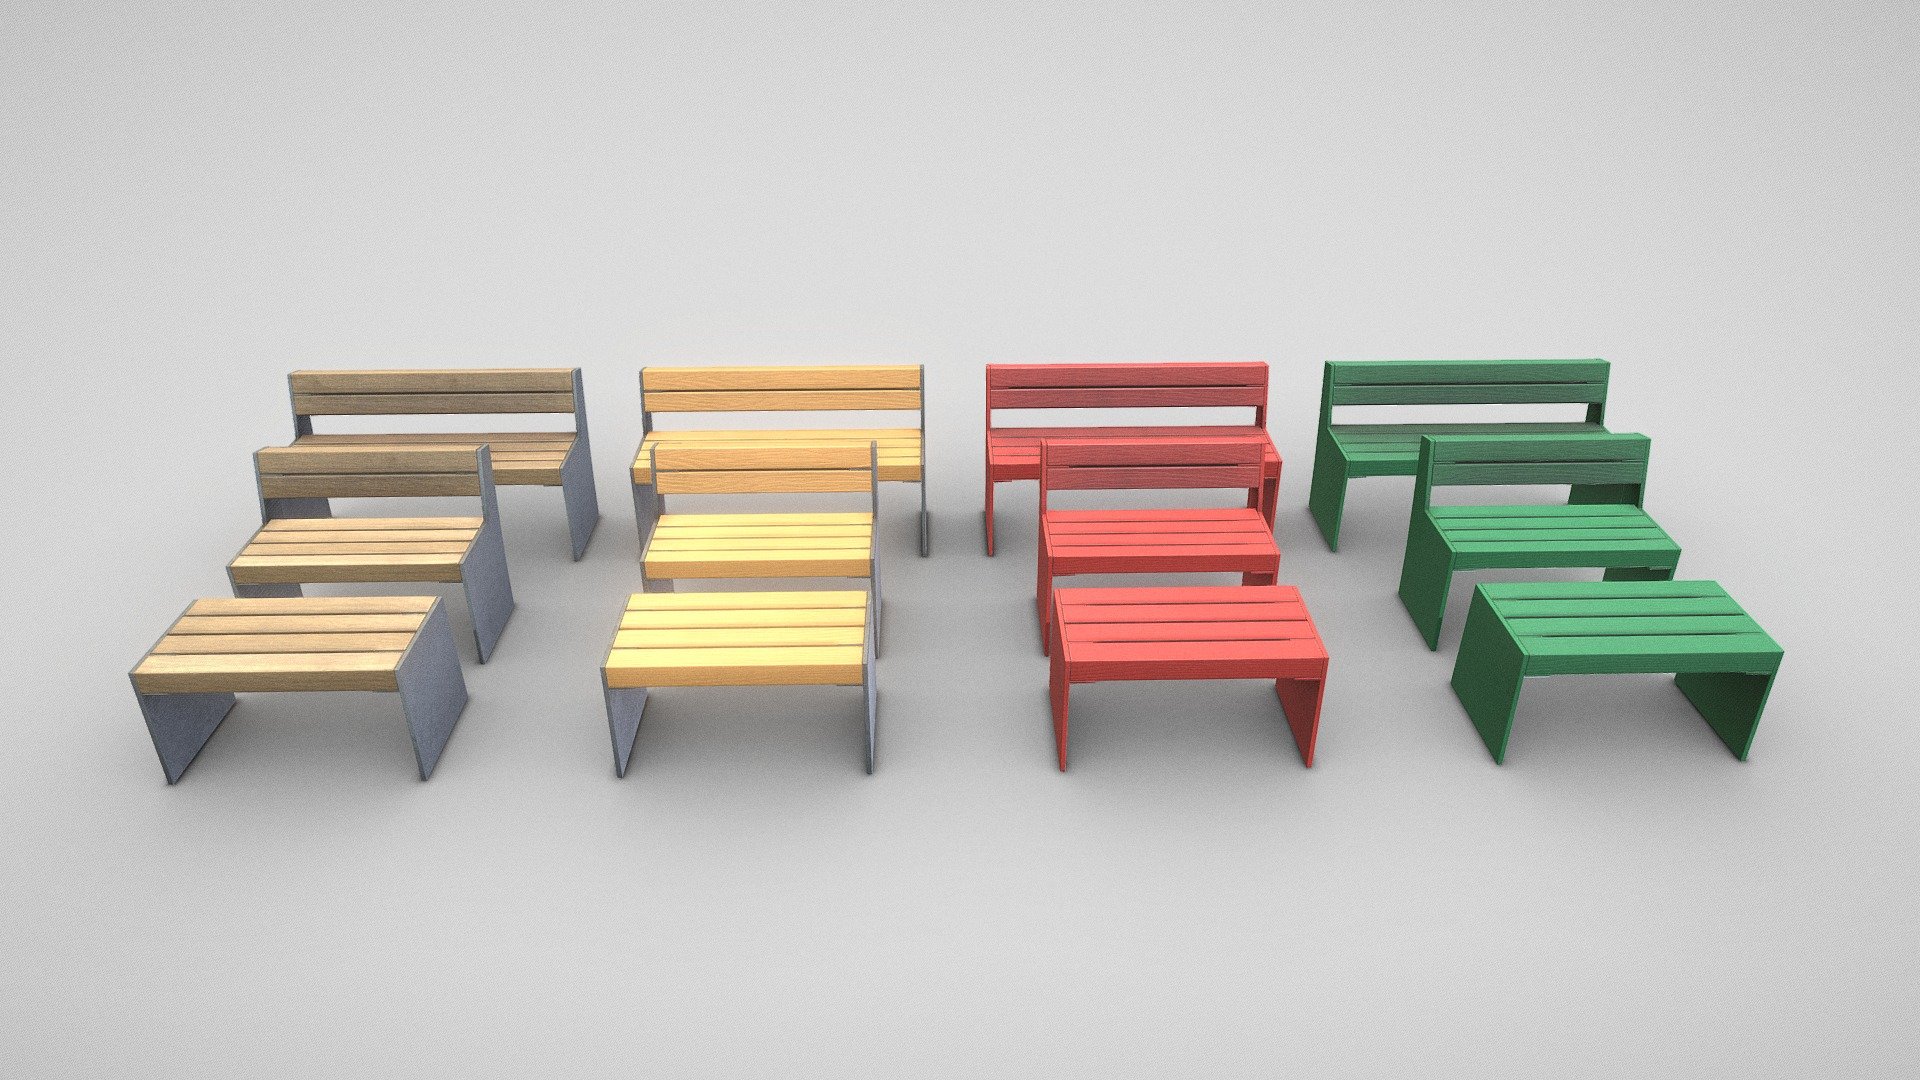 All type 8 park benches in one package.






PBR-Textures = 4K



Types:




Bench with Metal Frame 1

Object Dimensions -  1.262m x 0.723m x 1.048m

Vertices = 342

Edges = 912

Polygons = 592






Bench with Metal Frame 2 

Object Dimensions -  1.800m x 0.723m x 1.048m

Vertices = 342

Edges = 912

Polygons = 592






Bench with Metal Frame 3

Object Dimensions -  1.262m x 0.682m x 0.663m

Vertices = 212

Edges = 556

Polygons = 360






3d-modelled and textured by 3DHaupt in Blender-3D
 - All Type 8 Park Benches - Buy Royalty Free 3D model by VIS-All-3D (@VIS-All) 3d model